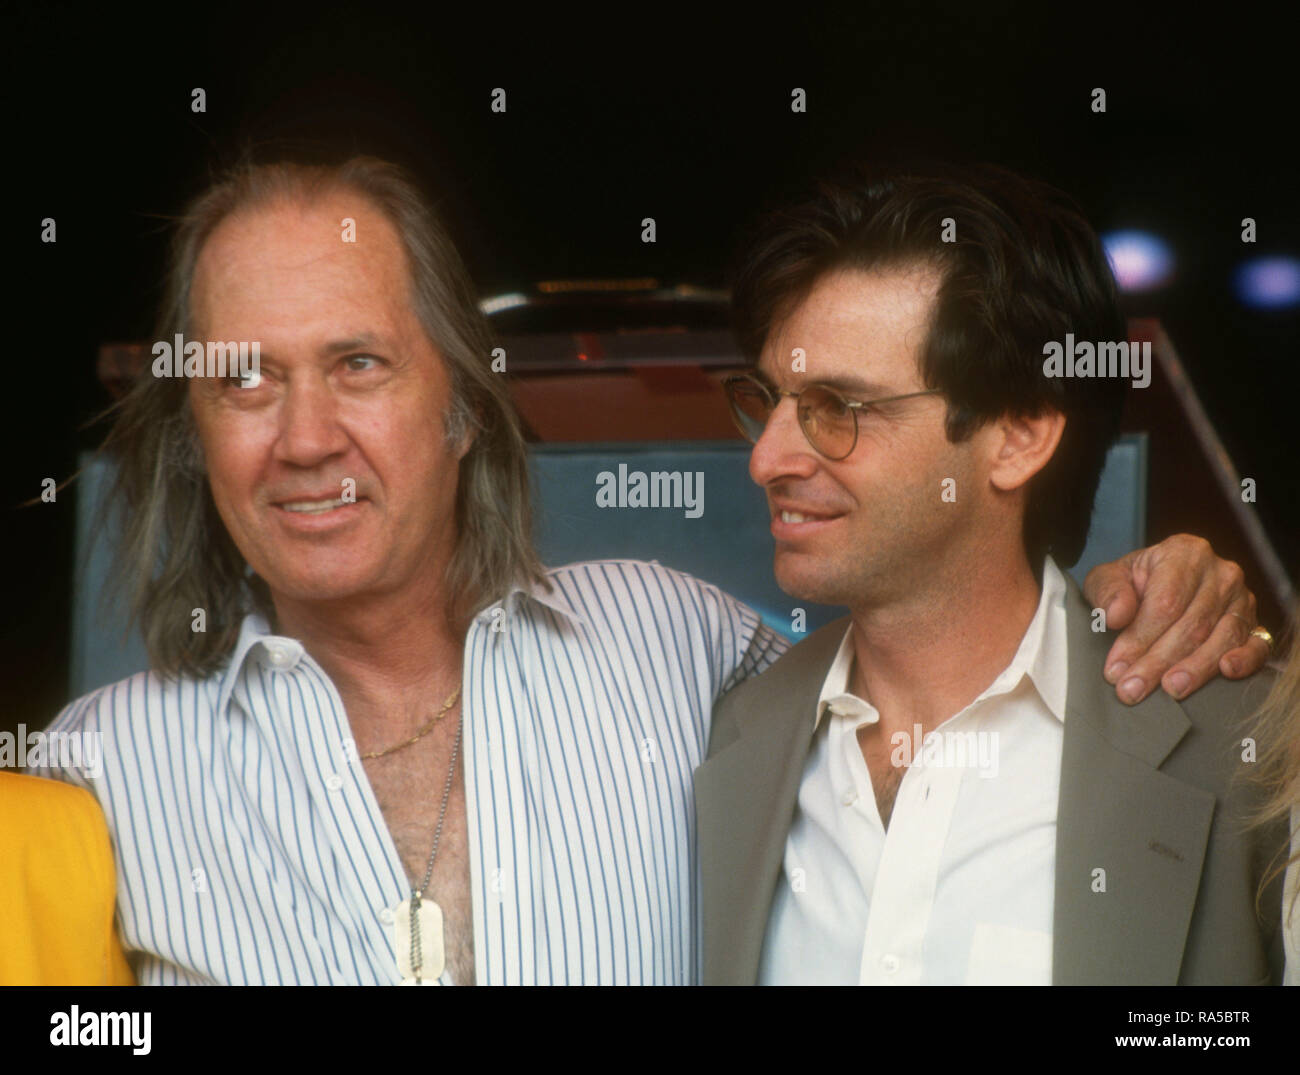 HOLLYWOOD, CA - JULY 15: Actors/brothers David and Robert Carradine attend Keith Carradine Star Ceremony on July 15, 1993 on Hollywood Walk of Fame in Hollywood, California. Photo by Barry King/Alamy Stock Photo Stock Photo